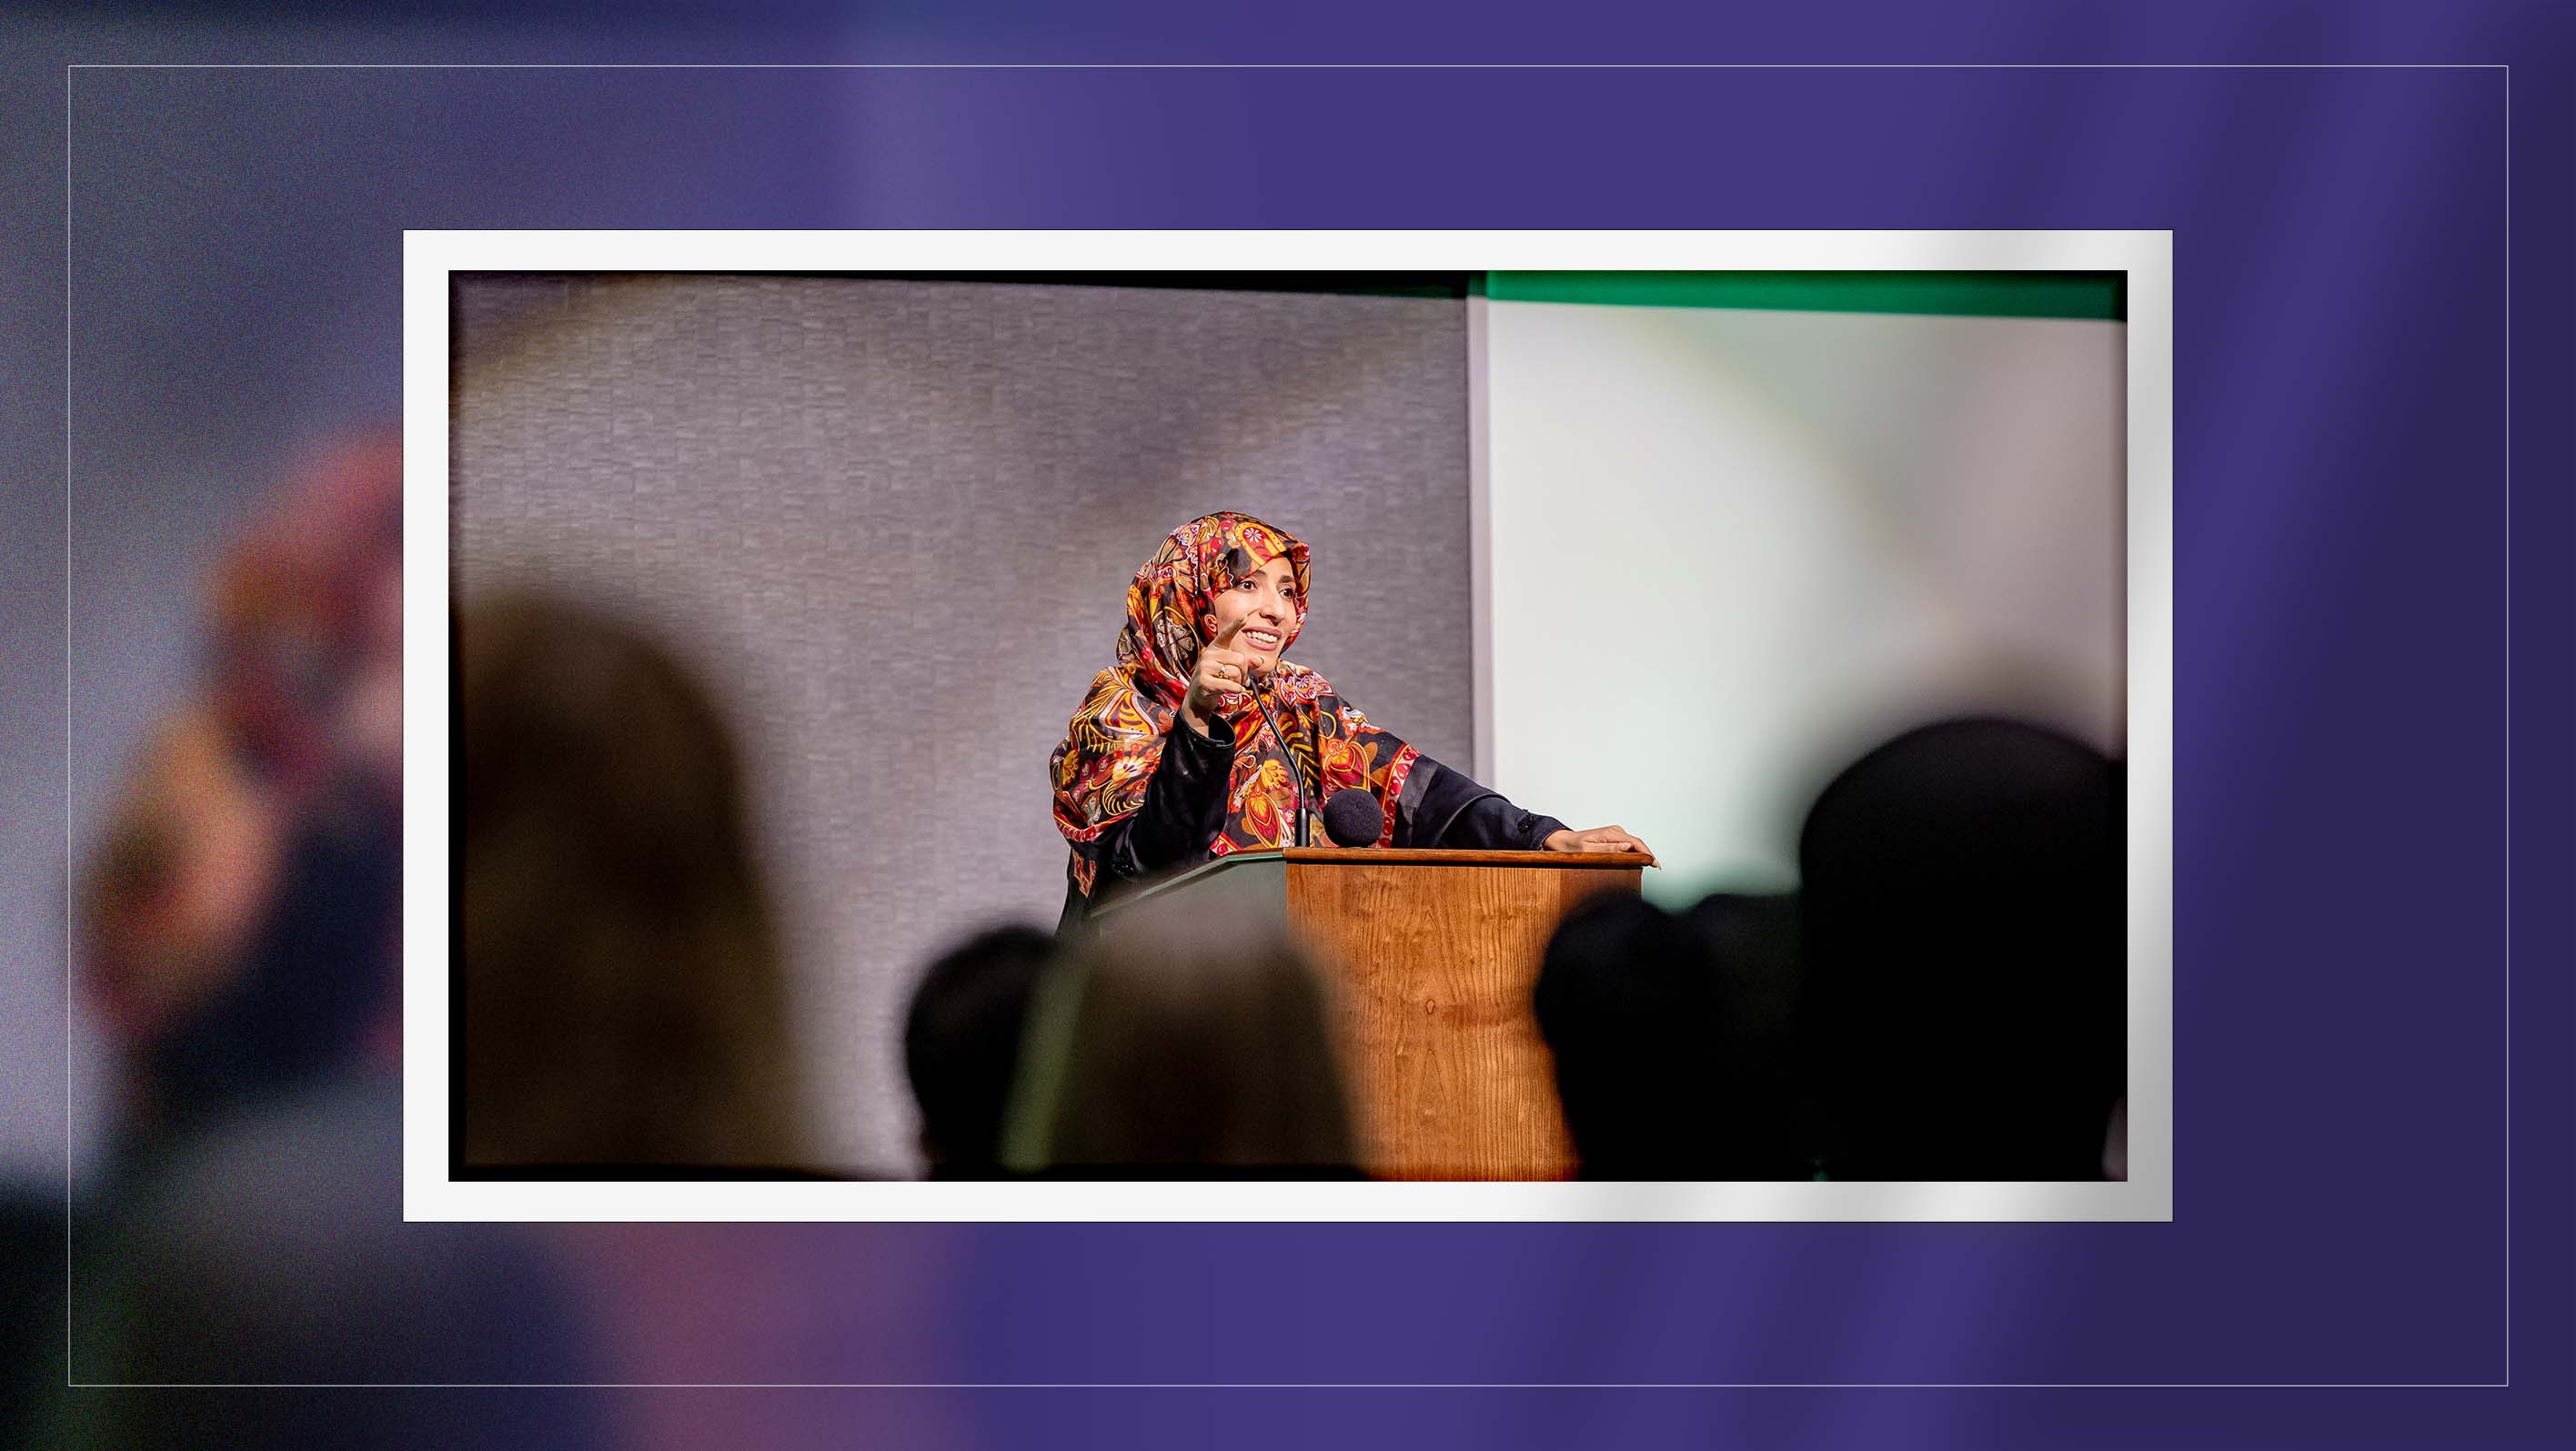 Tawakkol Karman delivers lecture on global challenges to democracy and human rights